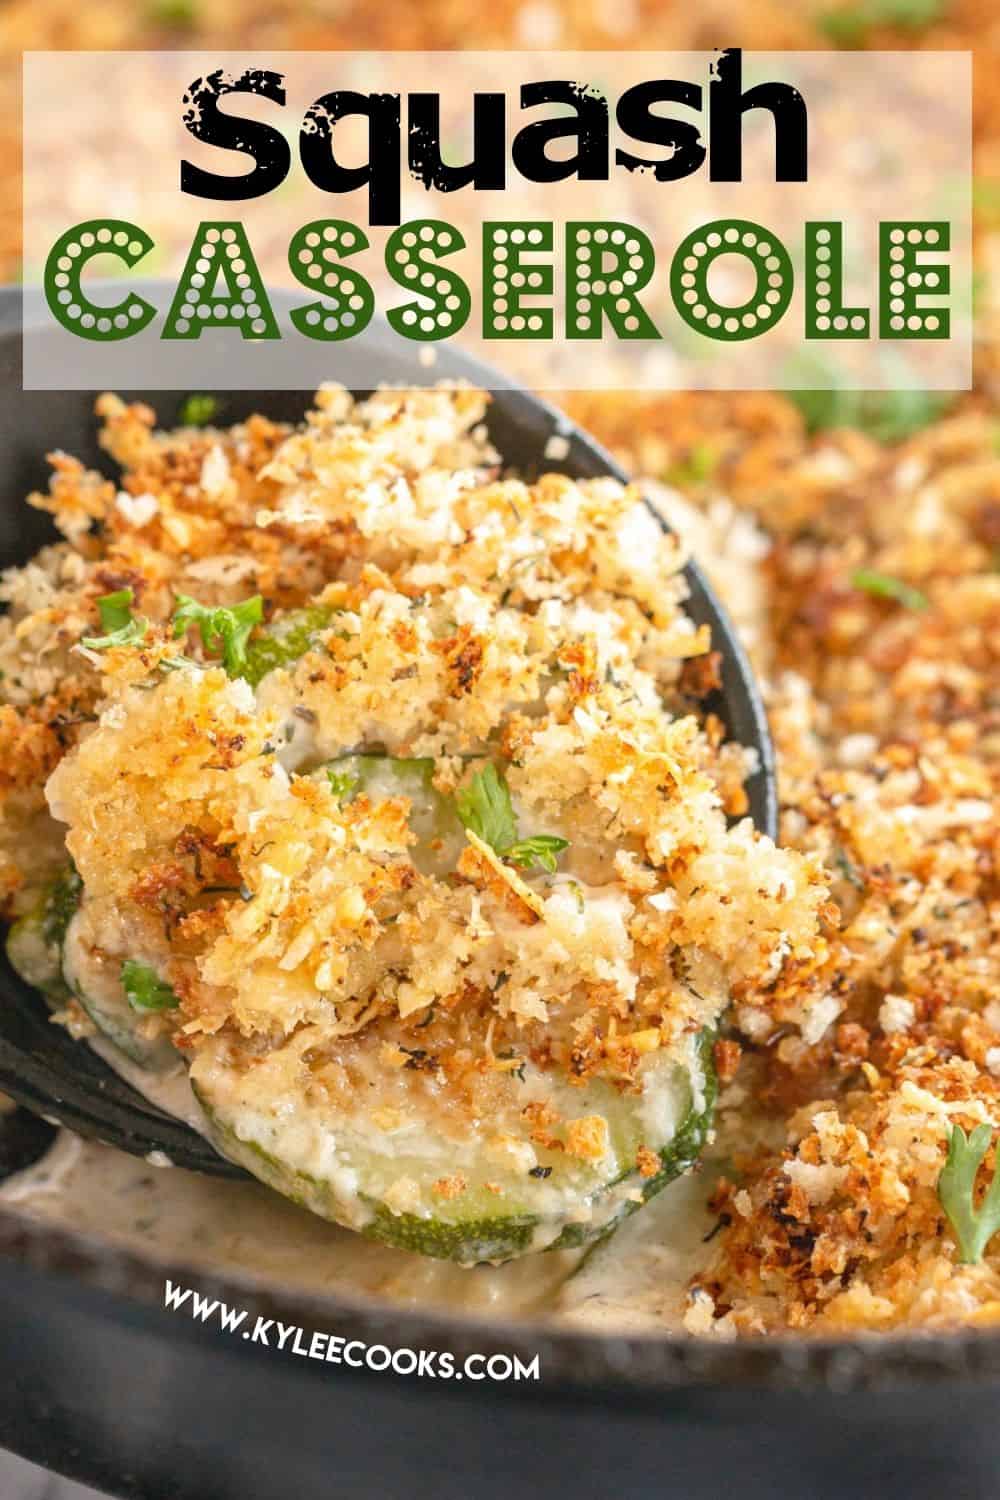 squash casserole in a skillet, with recipe name overlaid in text